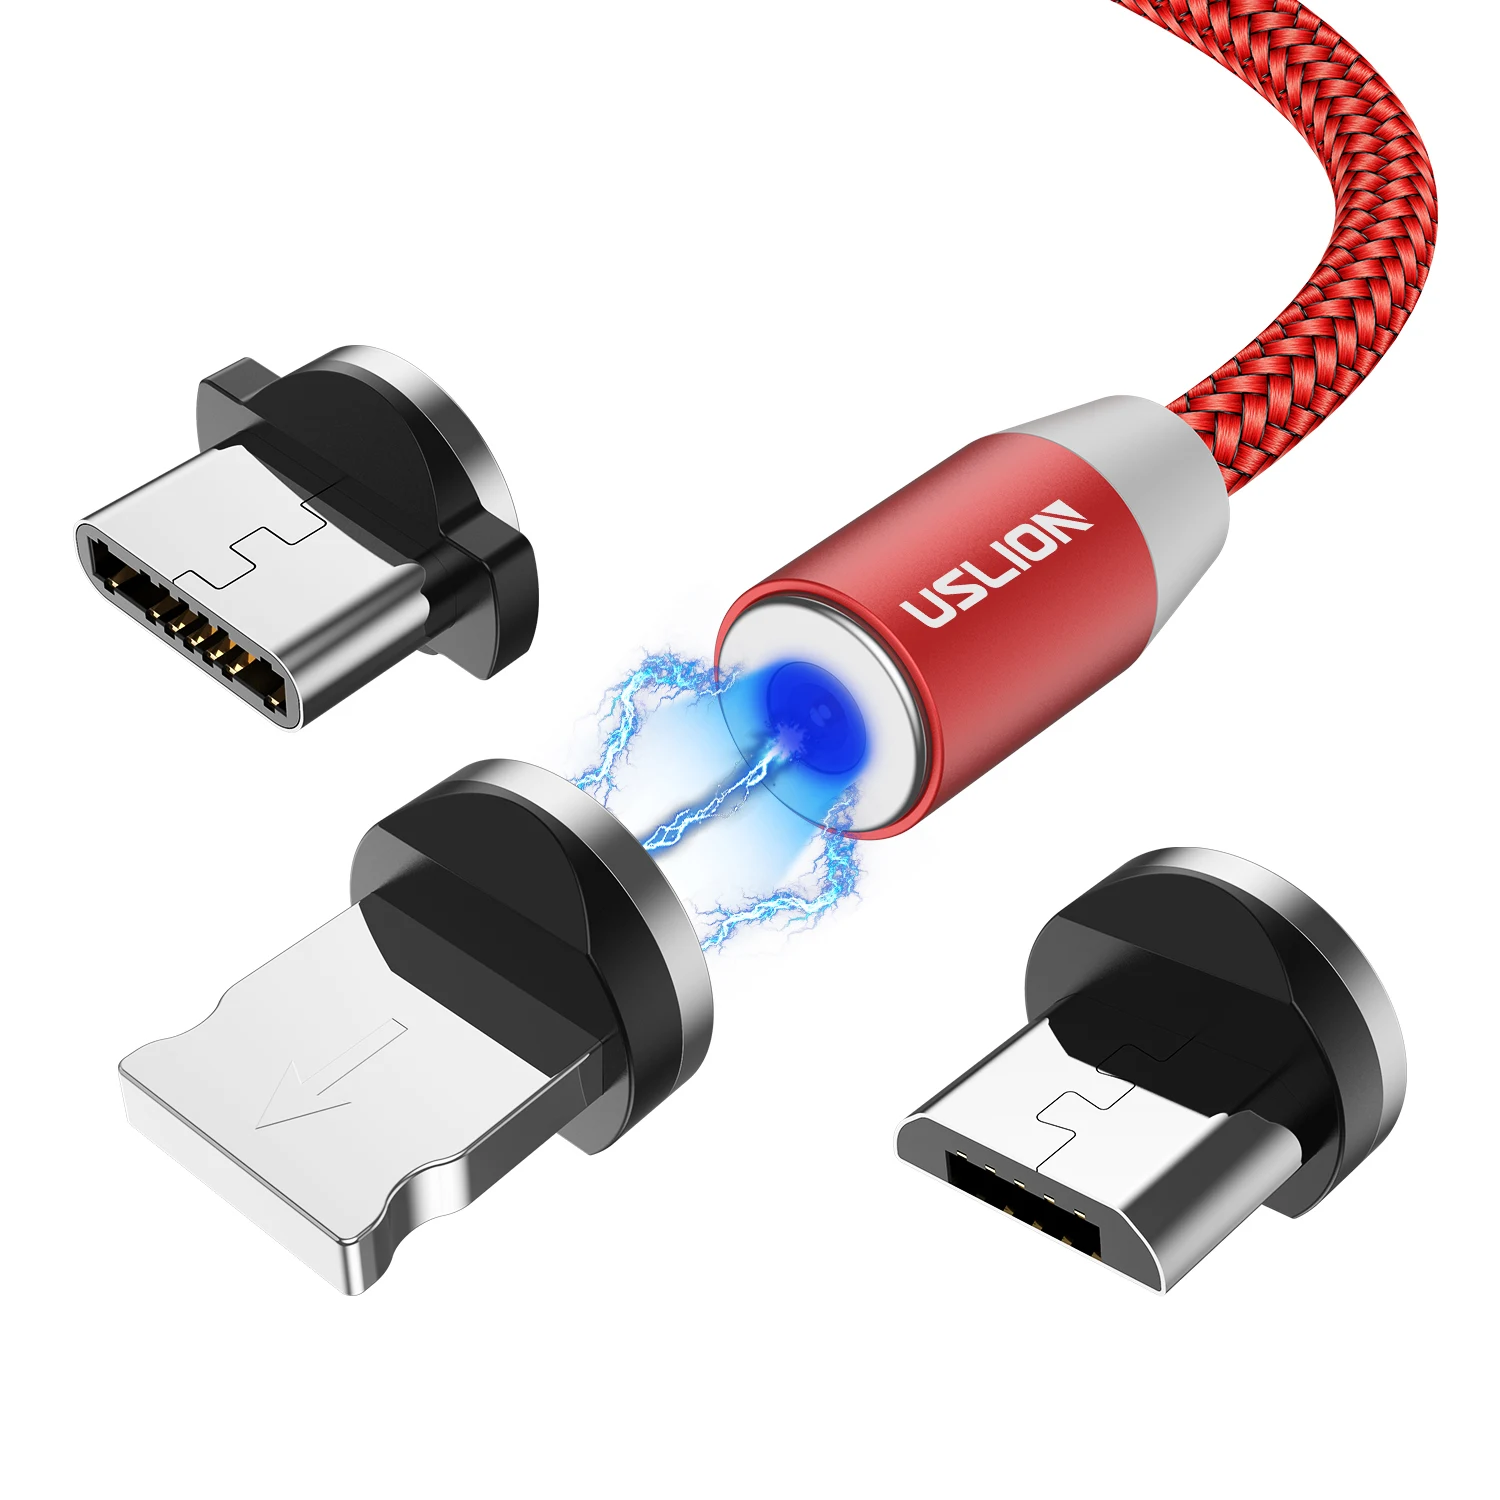 

USLION 3 in 1 USB Cable 1M(3.3ft) Magnetic USB Charging Cable For Micro USB, Gold;gray;red;silver